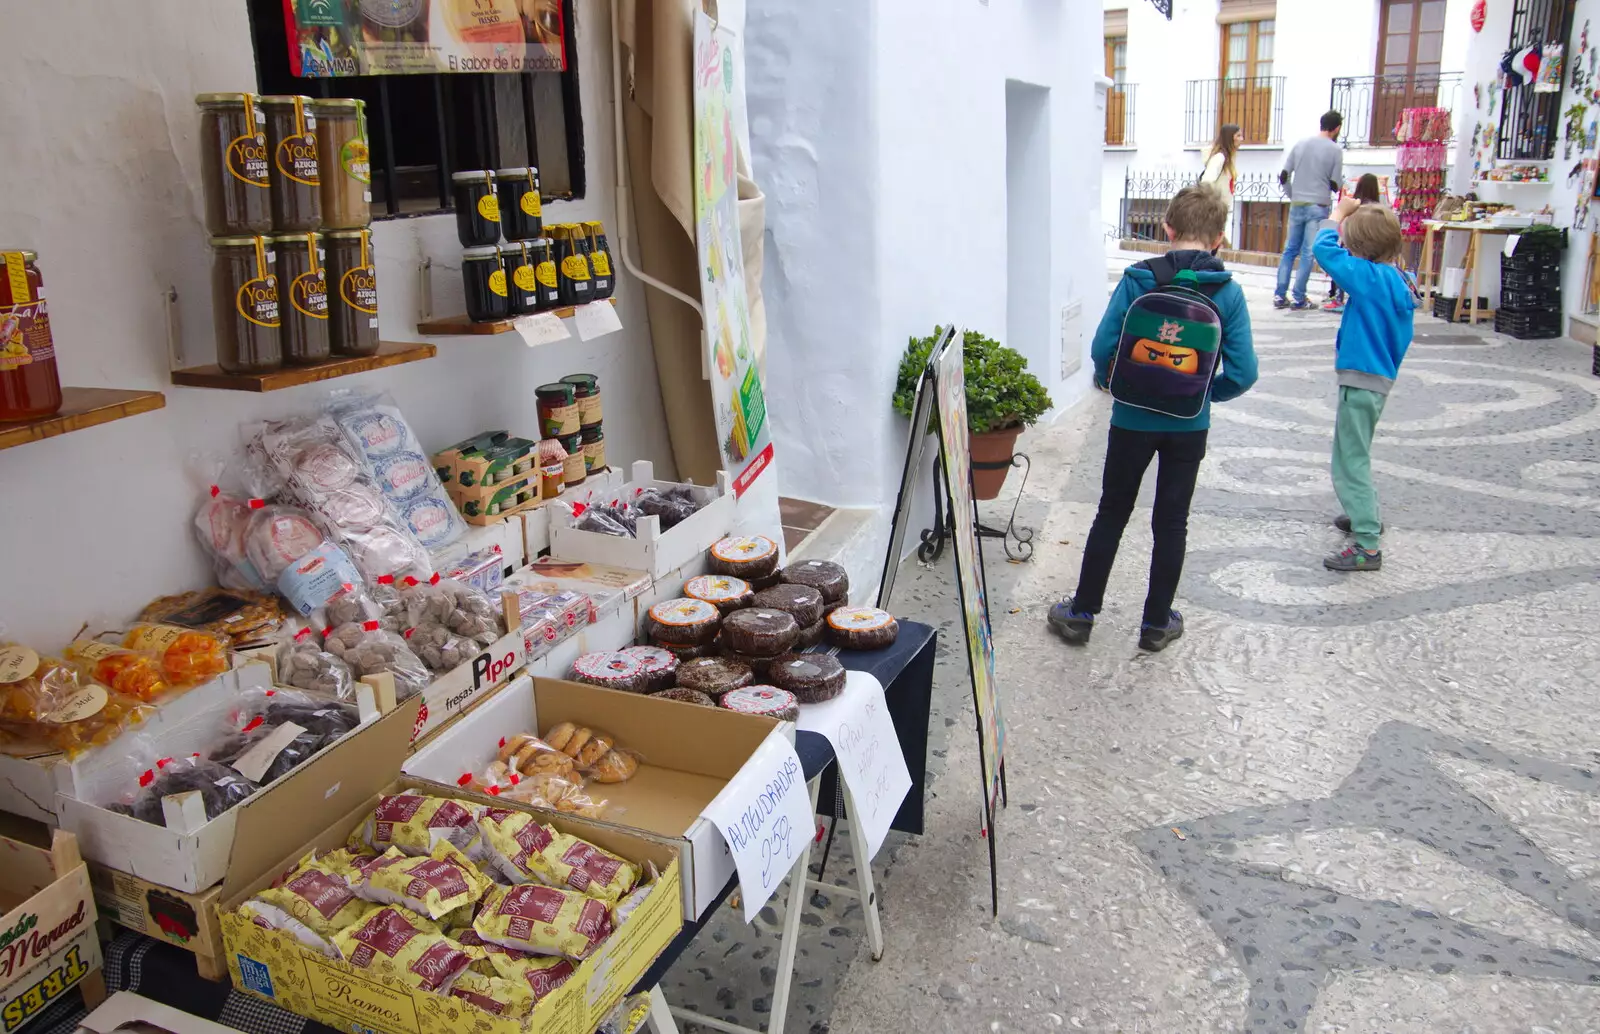 We stop for some cheese and pastries, from The Caves of Nerja, and Frigiliana, Andalusia, Spain - 18th April 2019